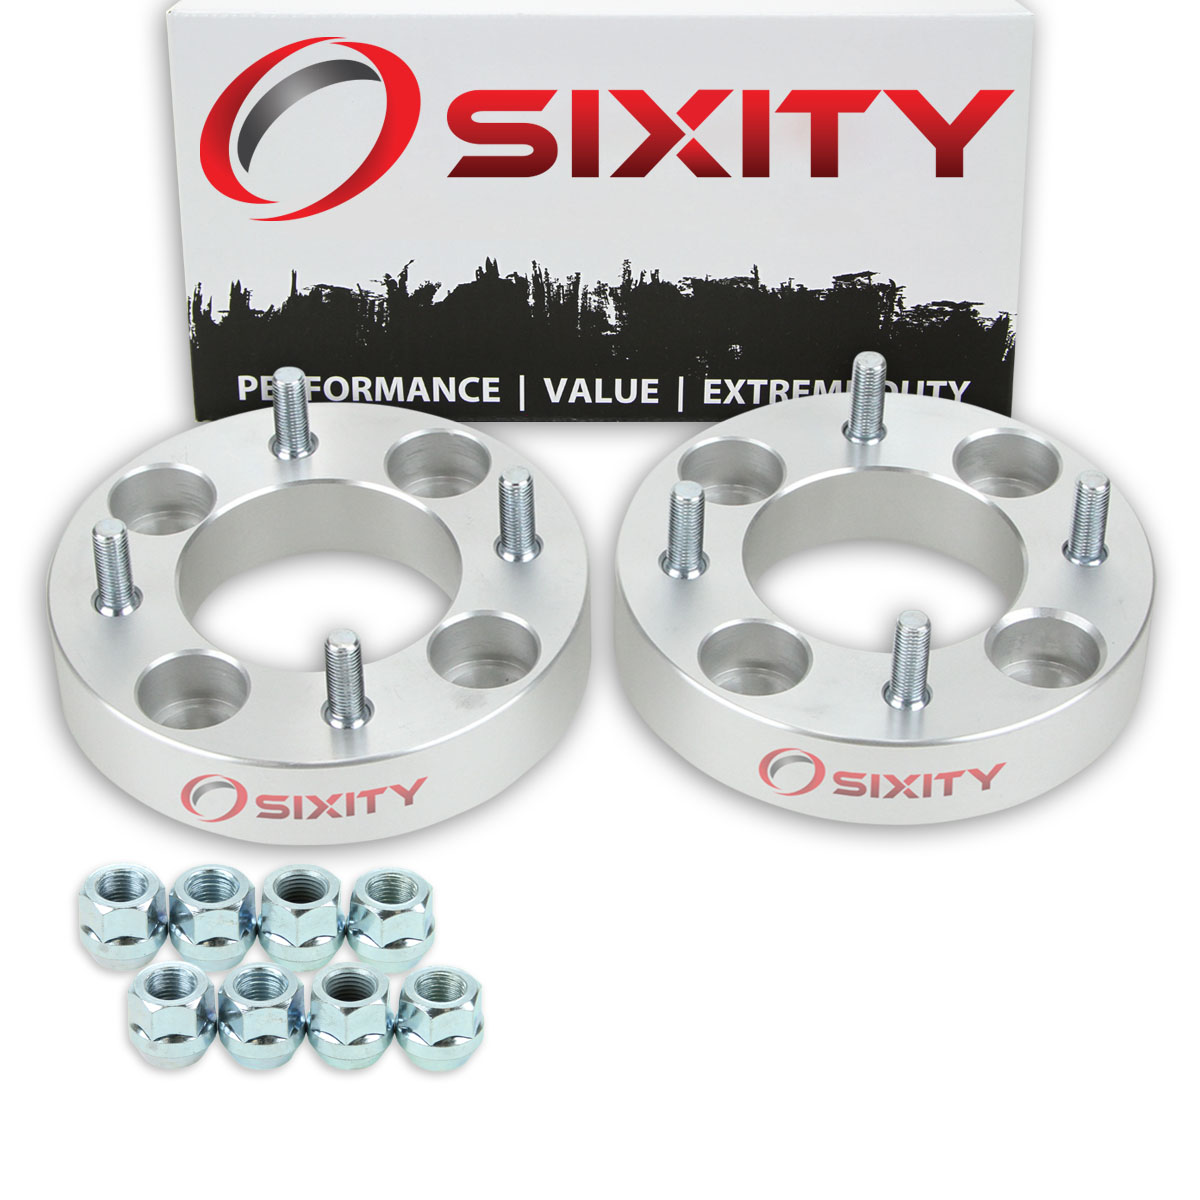 Sixity 2 pc 1.25 Inch Honda Rincon TRX 680 4/110 Front Wheel Spacers